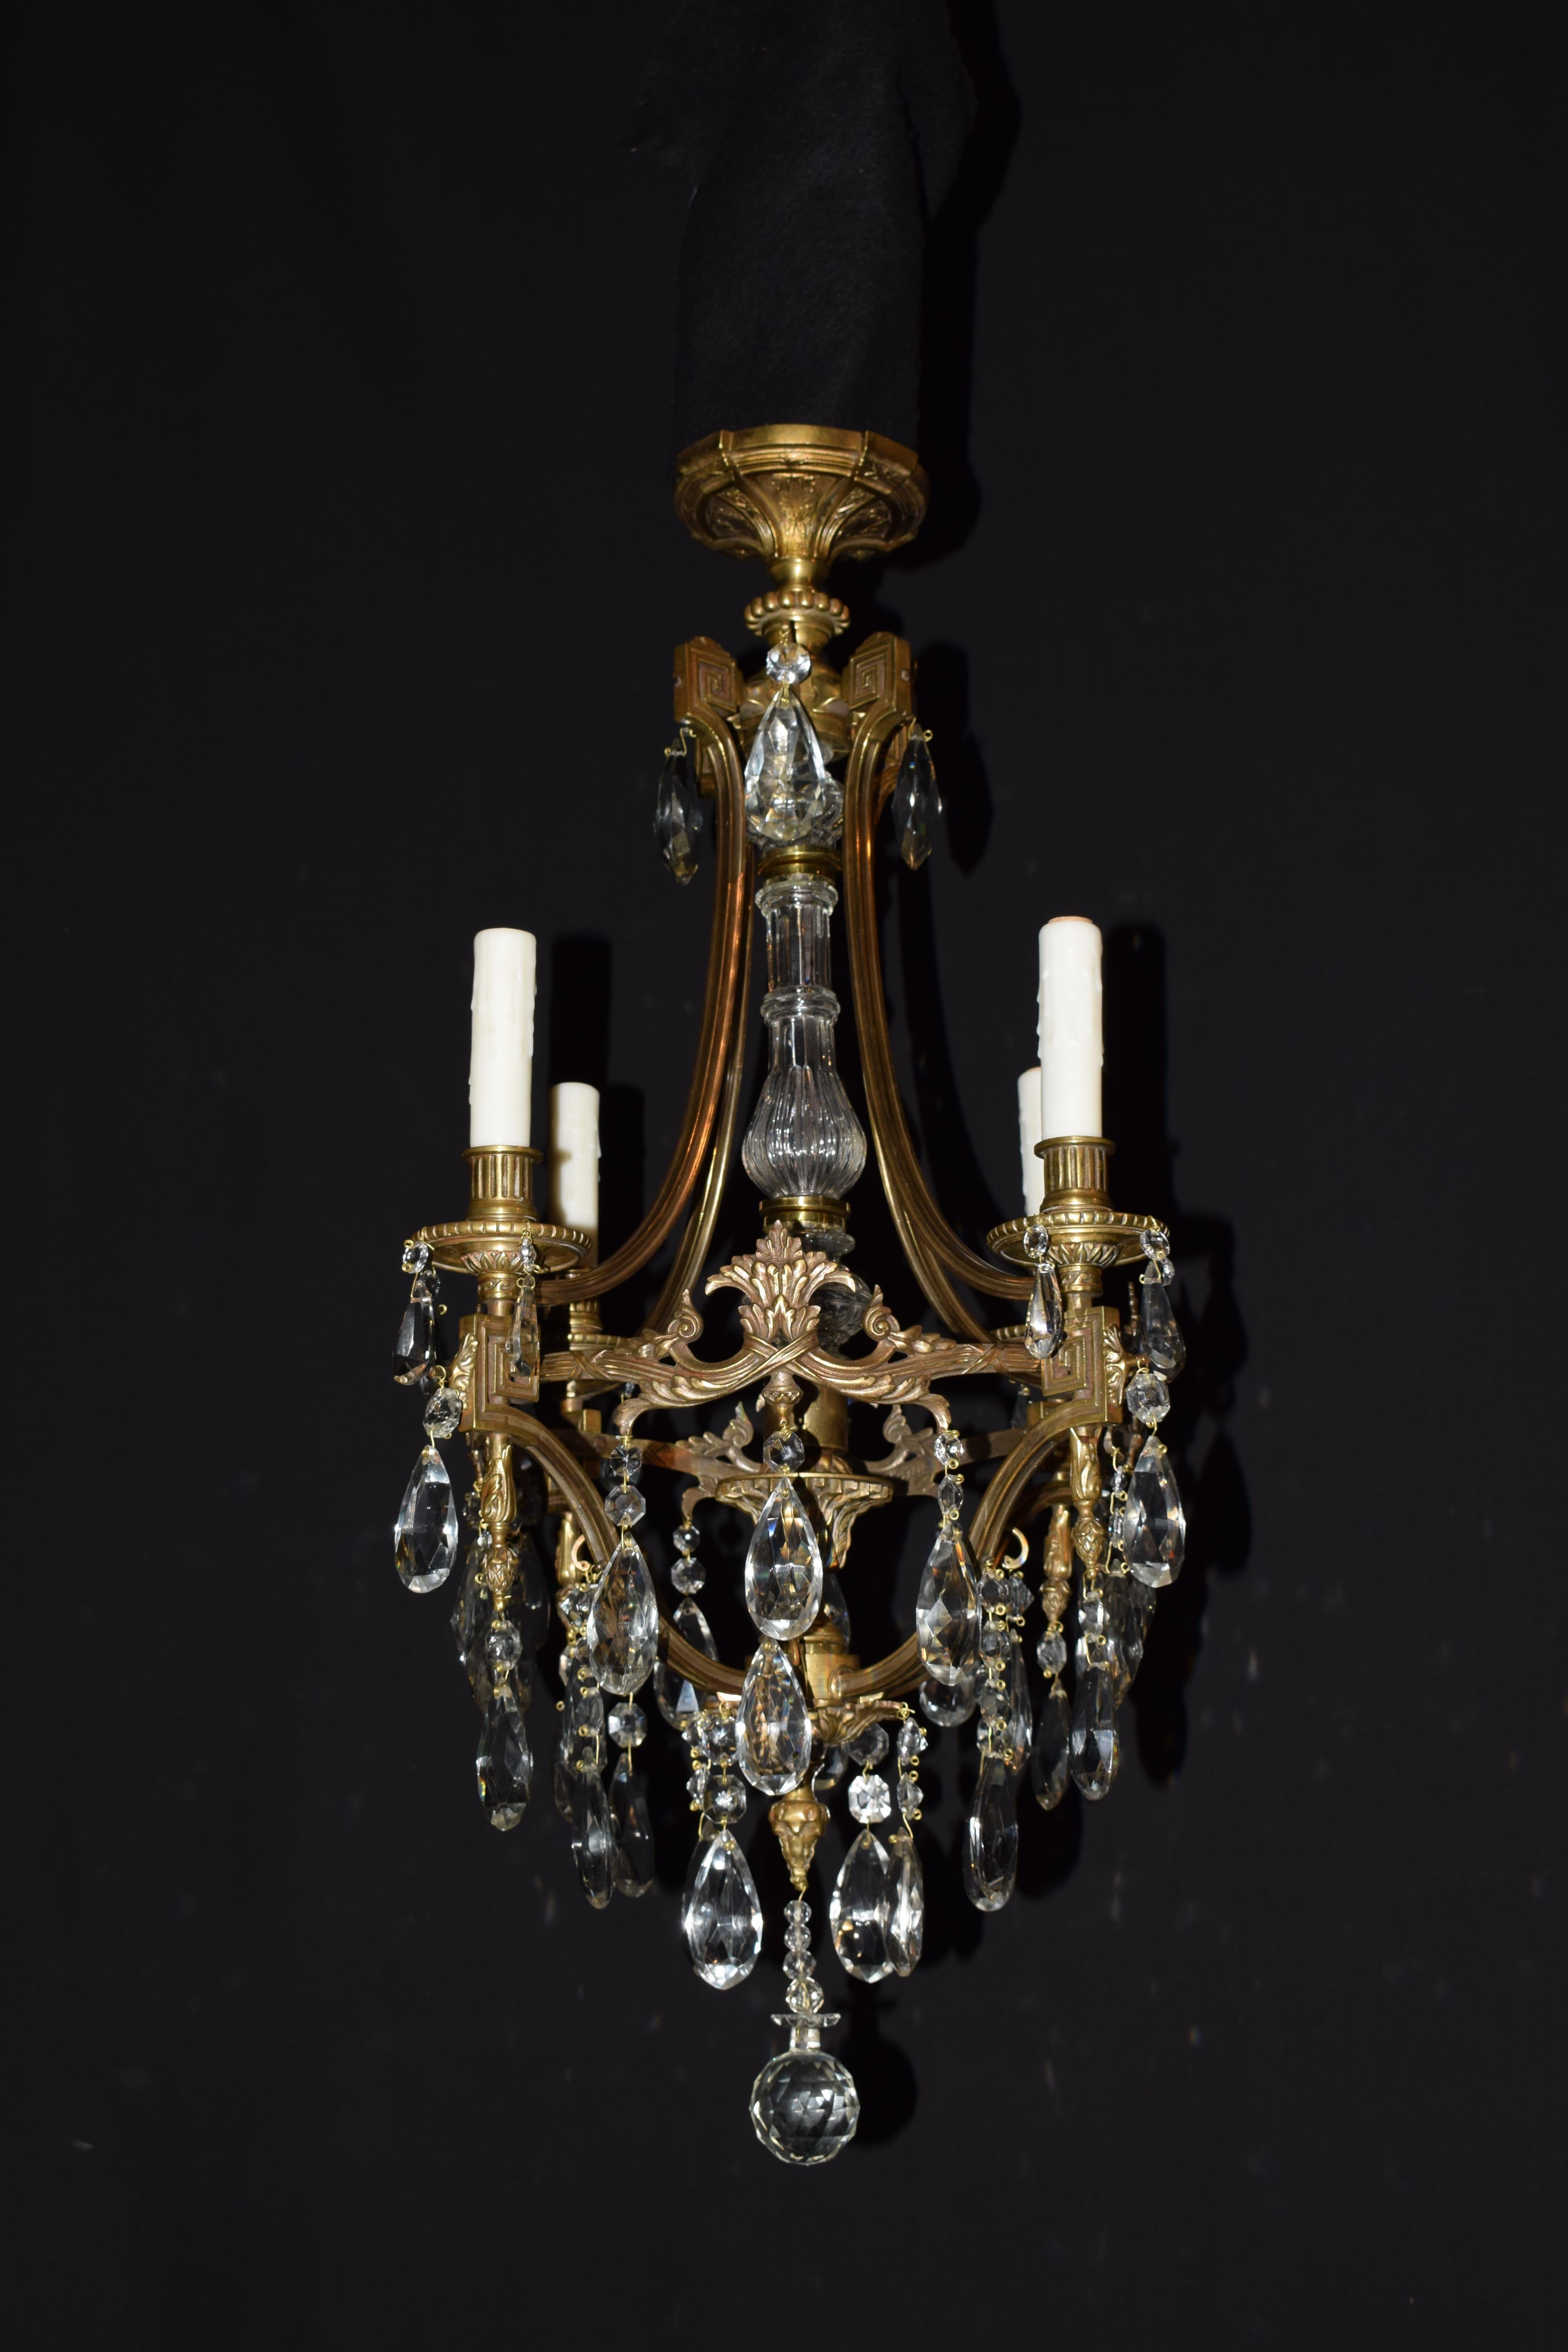 A Fine & Elegant Louis XVI style Gilt Bronze & Crystal chandelier by Baccarat. France, circa 1930
Height 33